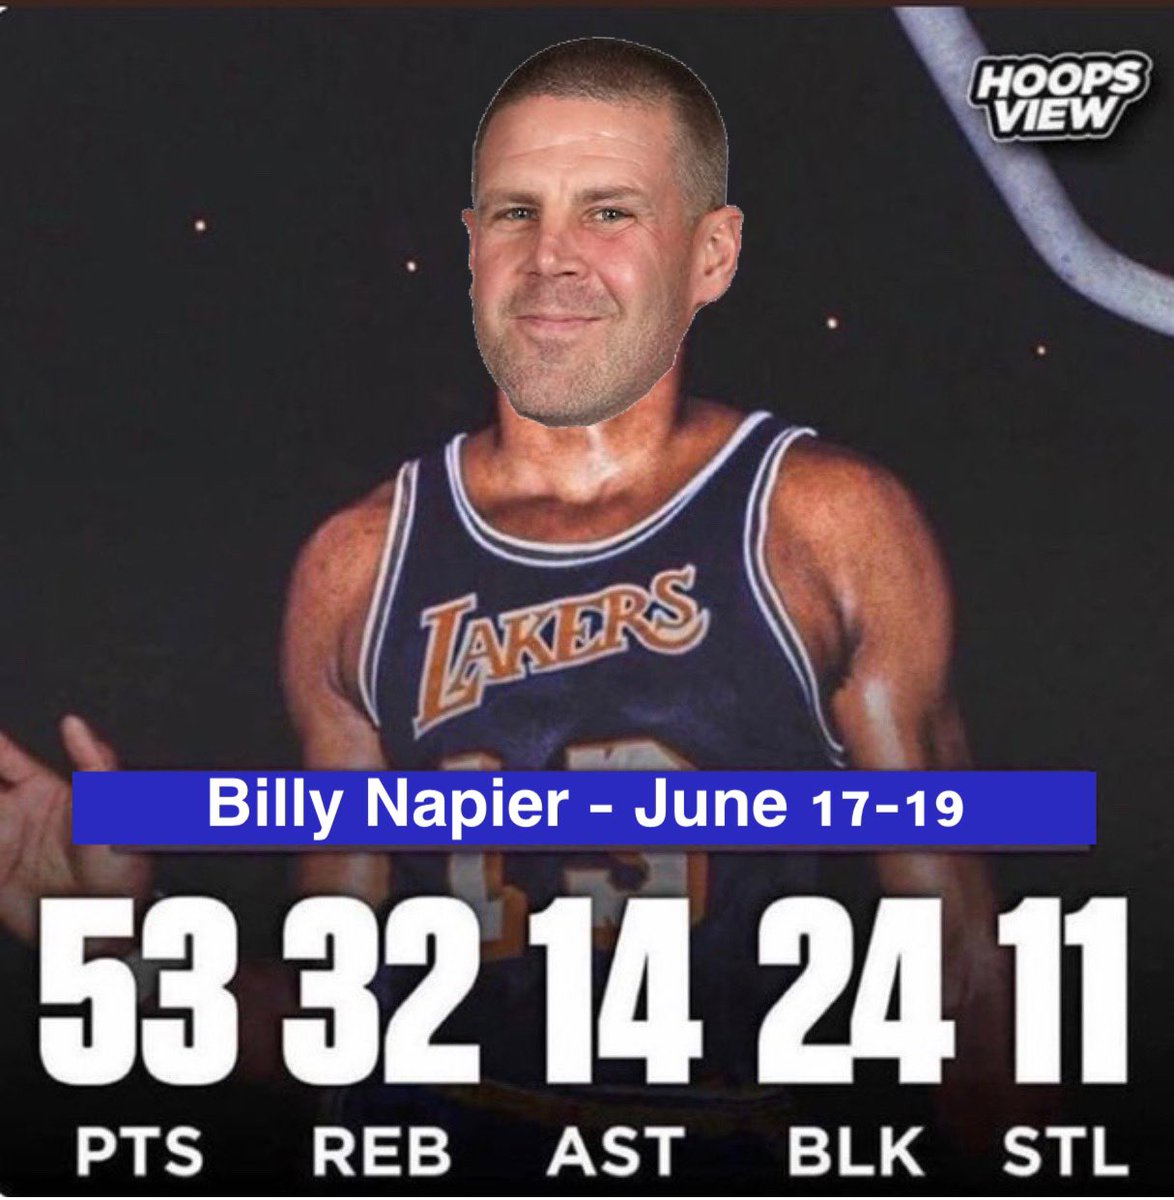 Billy Napier this weekend